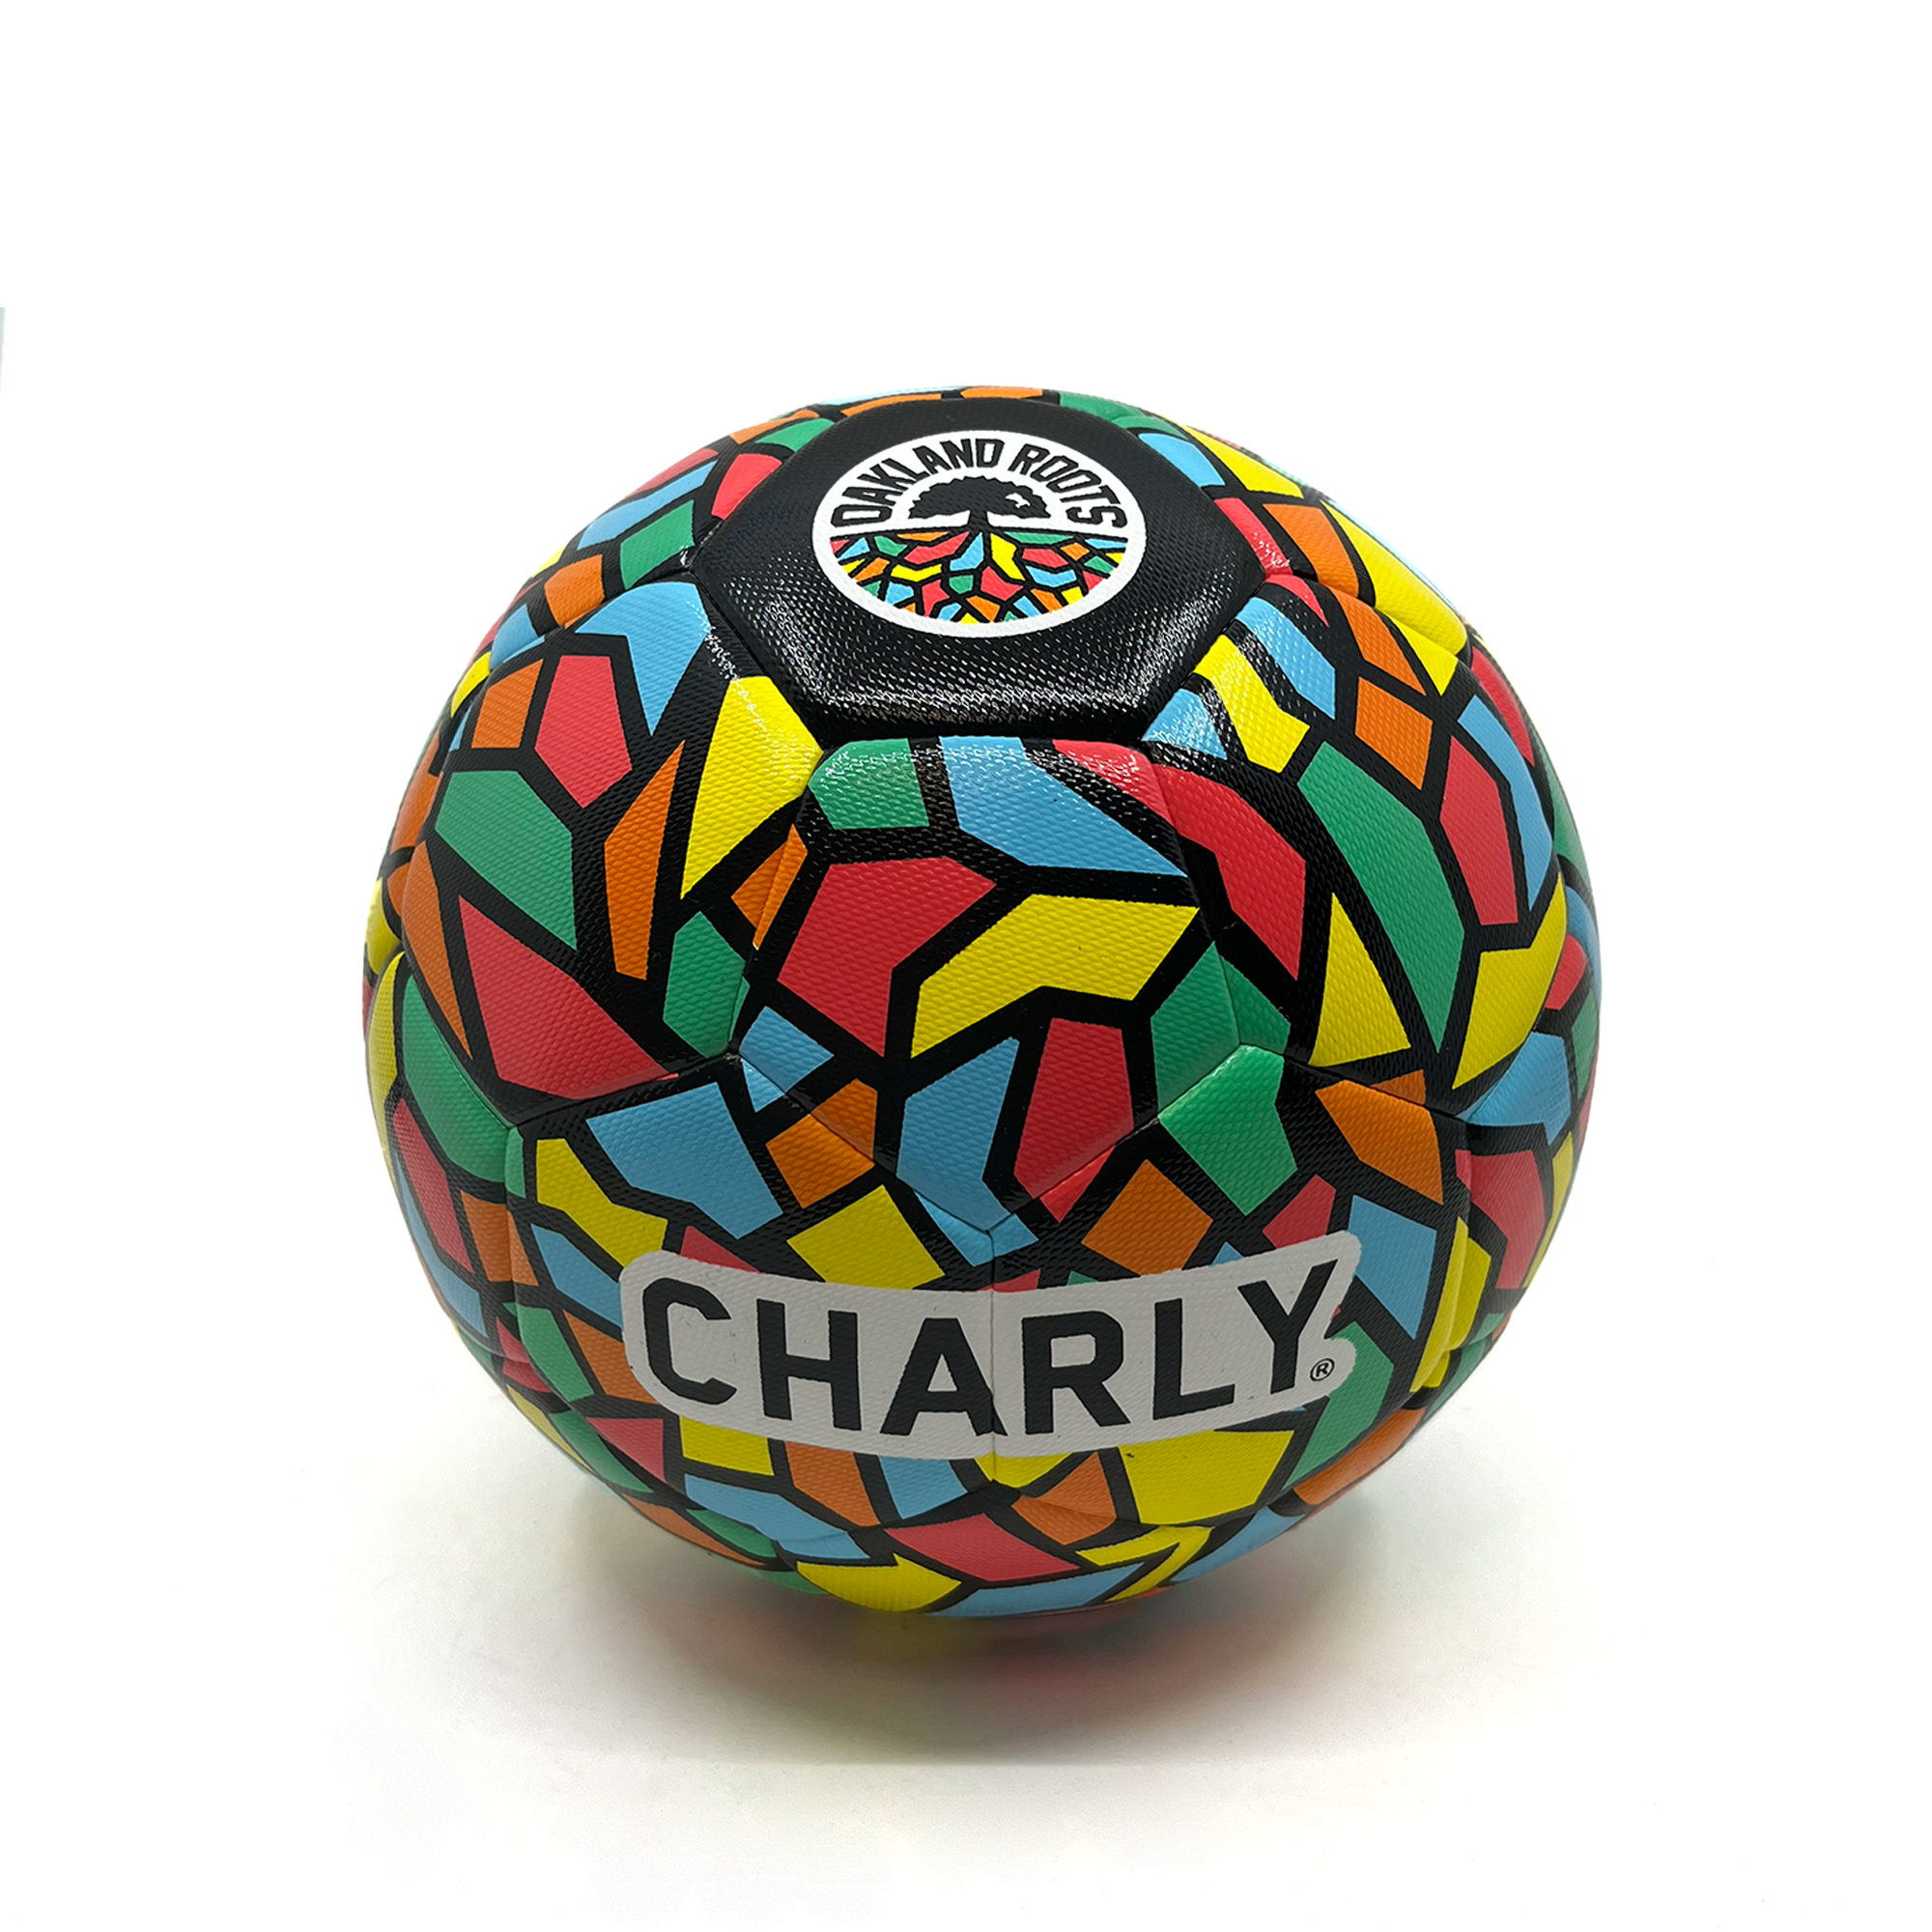 Size 5 soccer ball with mosiac design and Oakland Roots SC Crest. Charly in block text on center of ball.